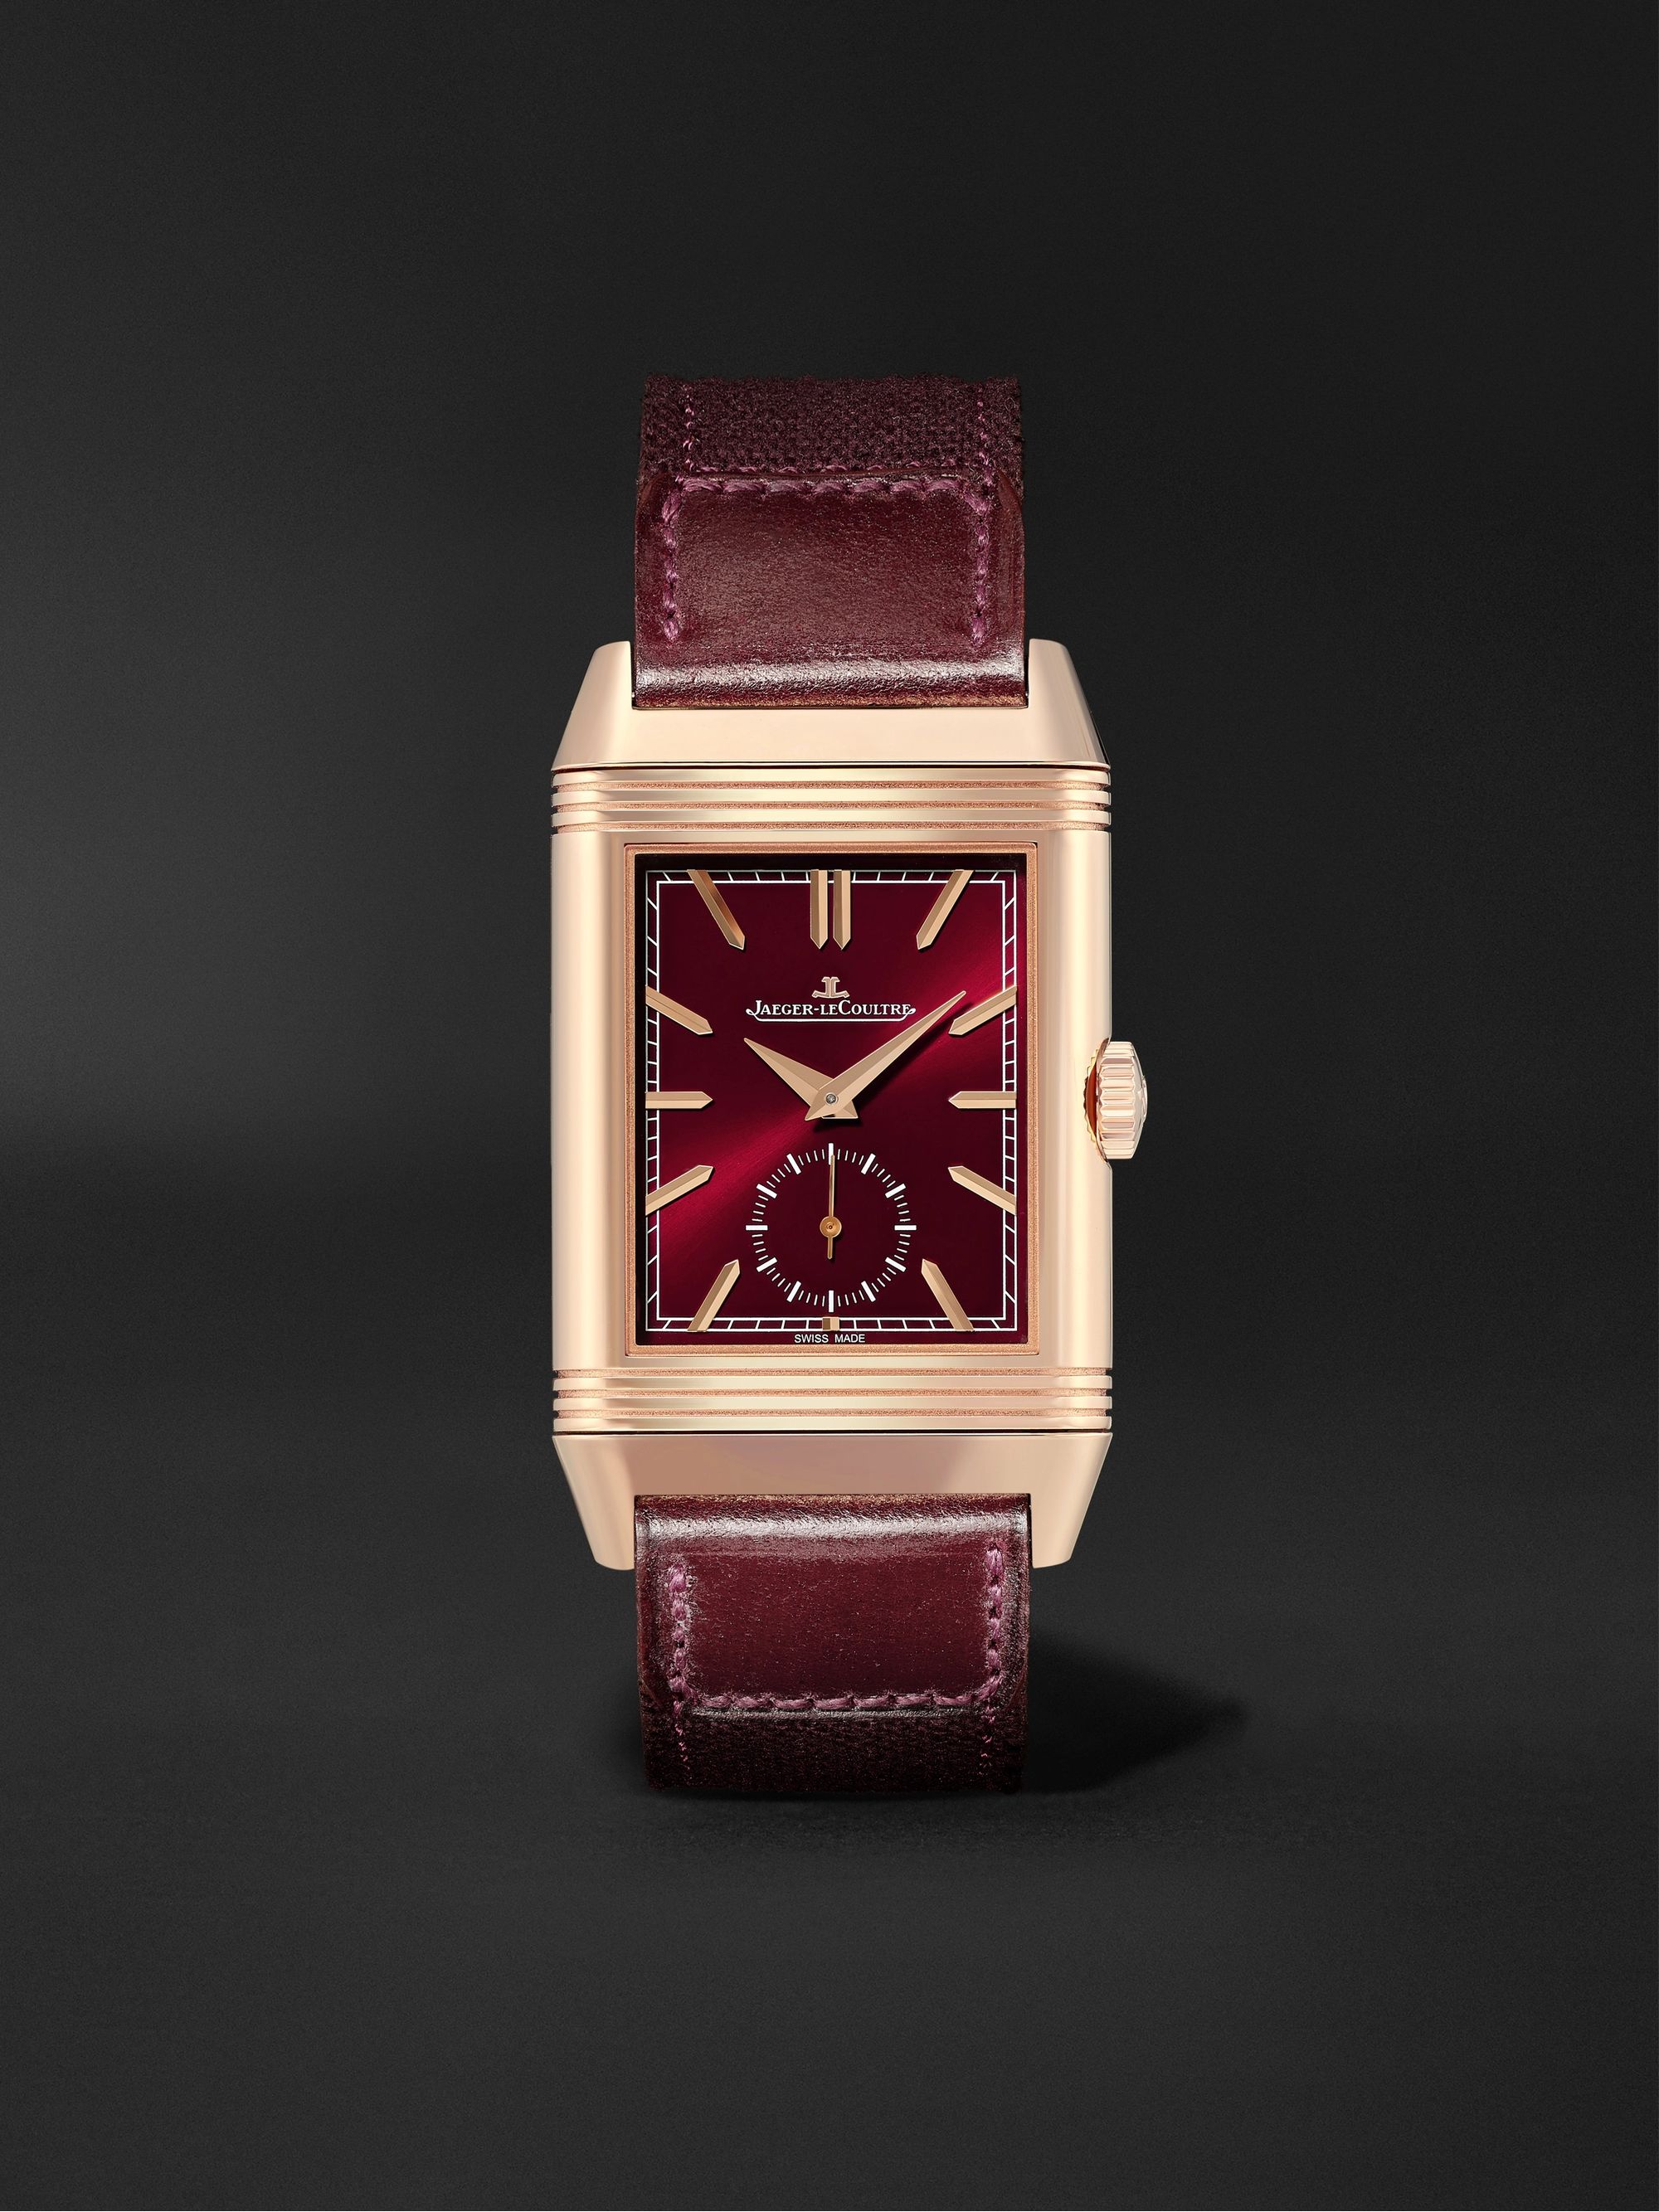 JAEGER-LECOULTRE + Casa Fagliano Reverso Tribute DuoFace Limited Edition Hand-Wound 28.3mm 18-Karat Rose Gold and Leather Watch, Ref. No. Q398256J